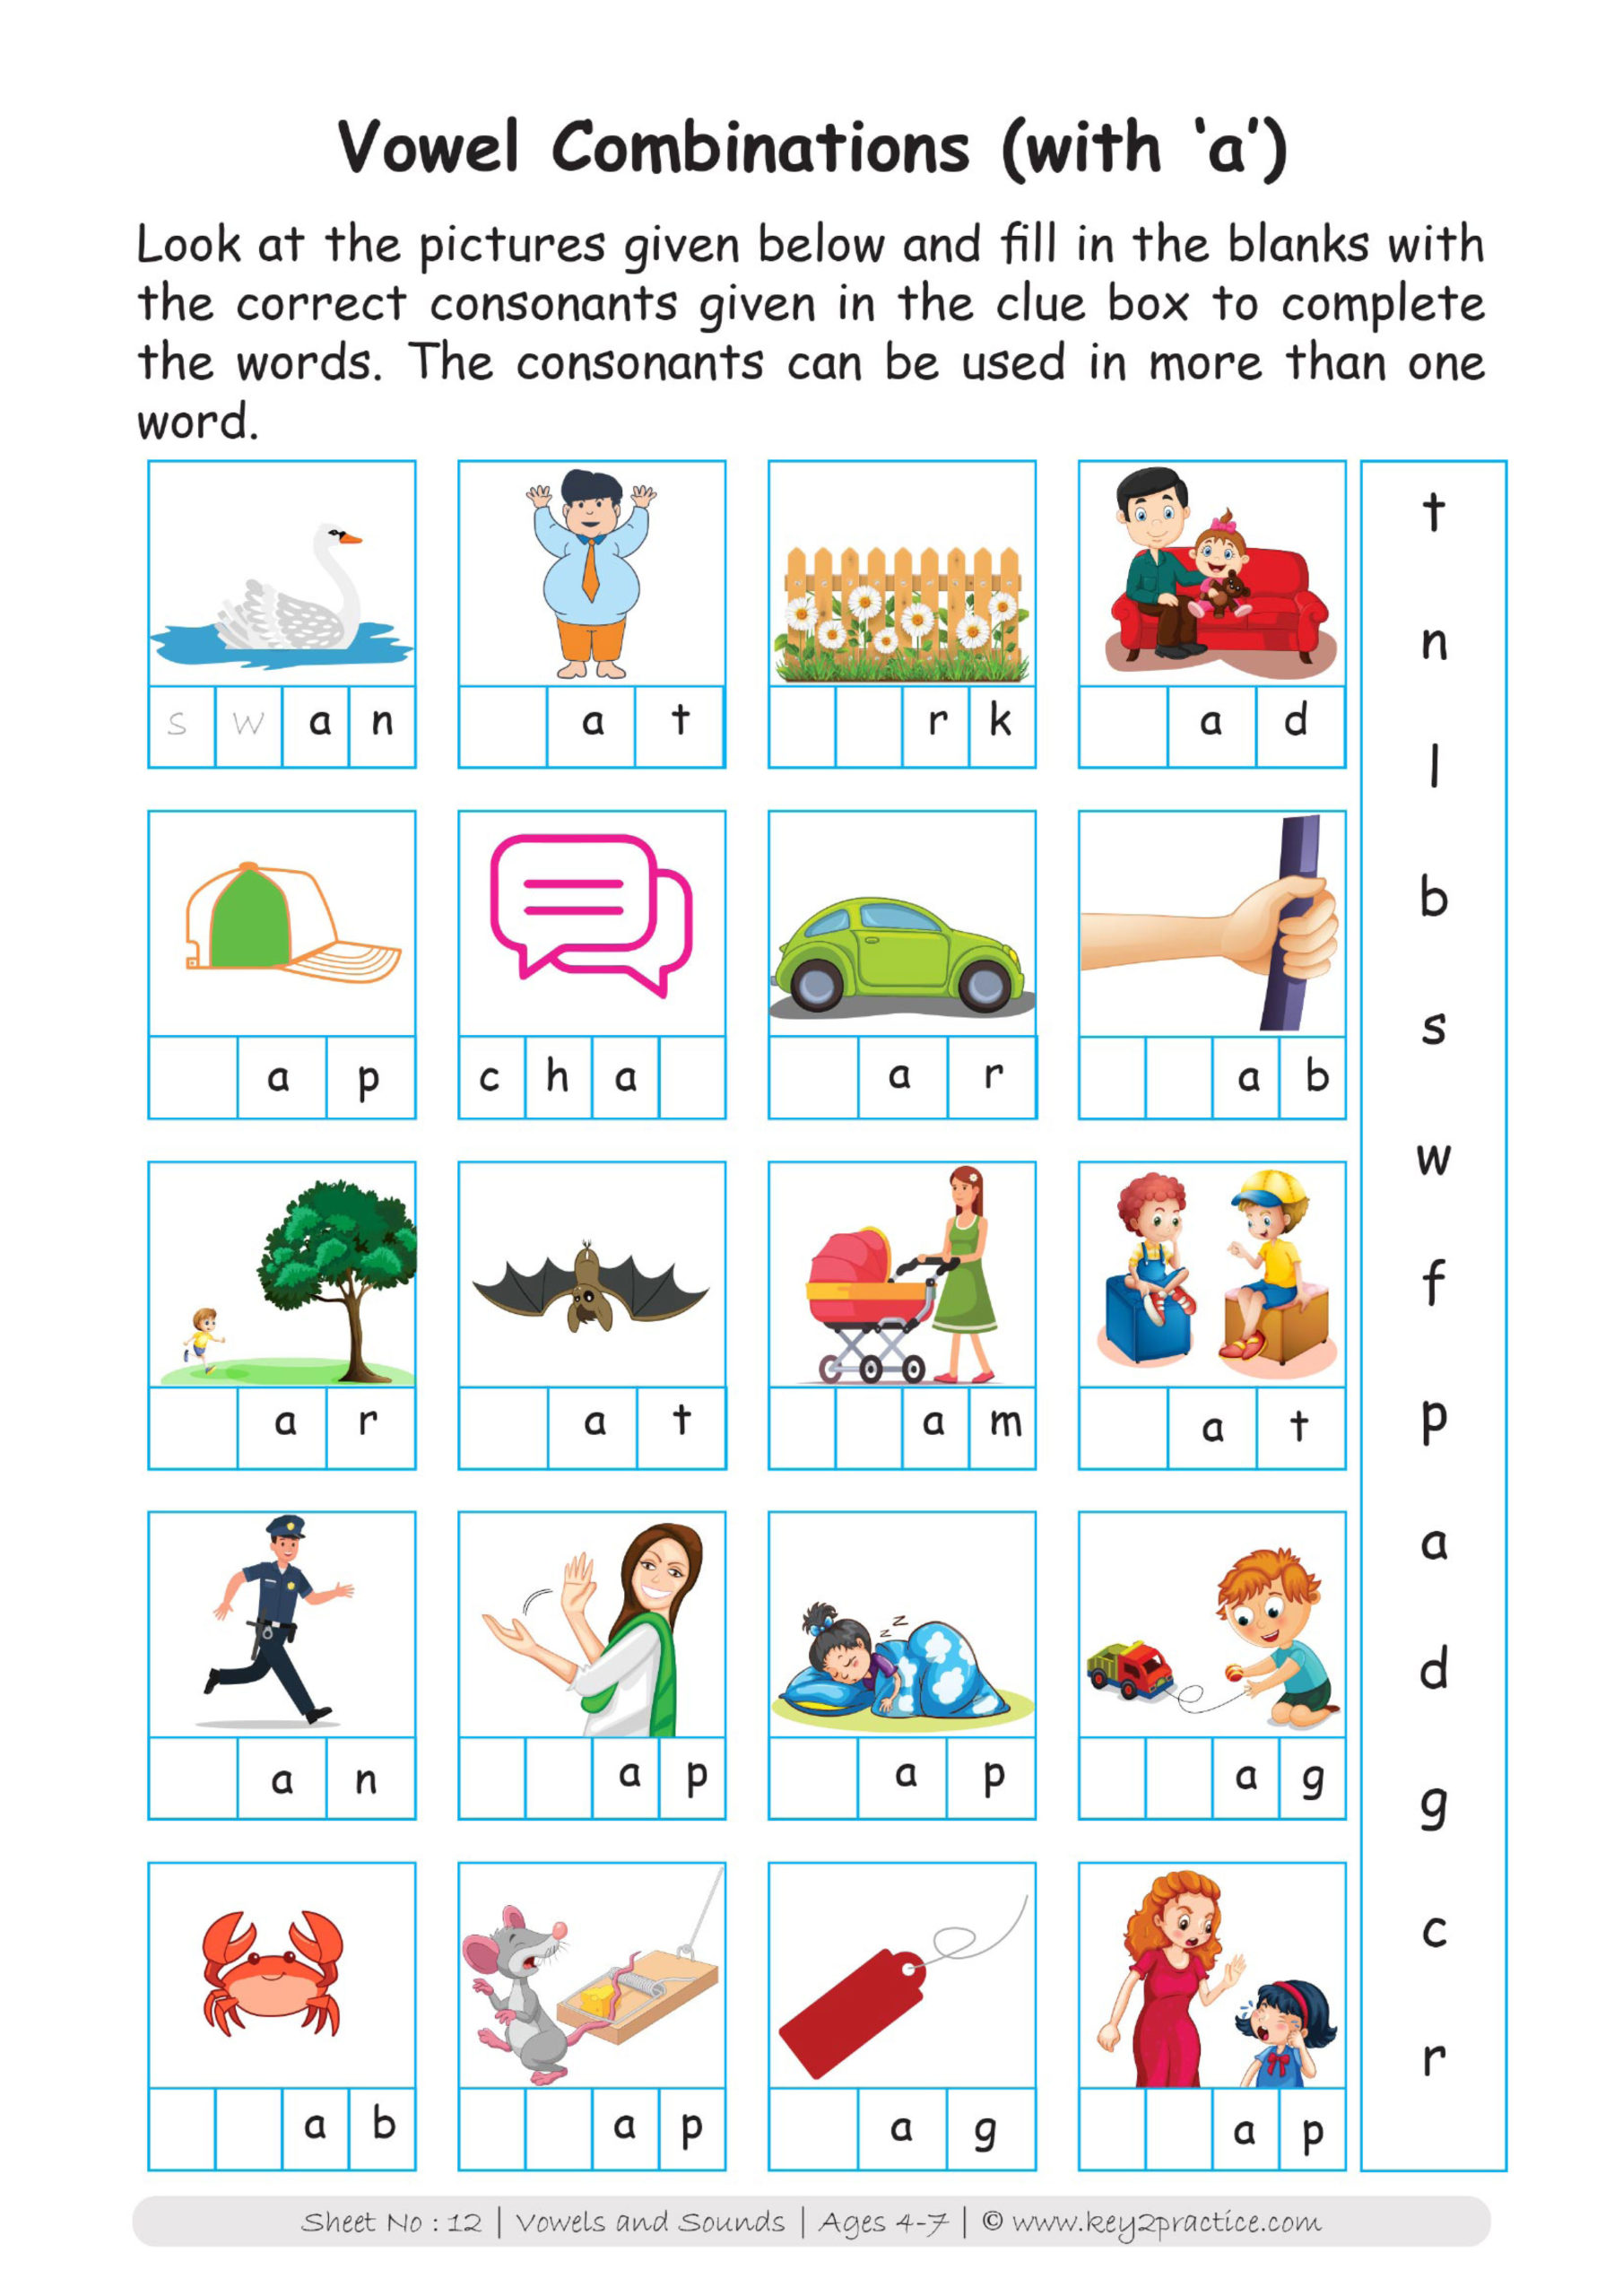 Vowels And Consonants Worksheets I Pre primary Classes Key2practice